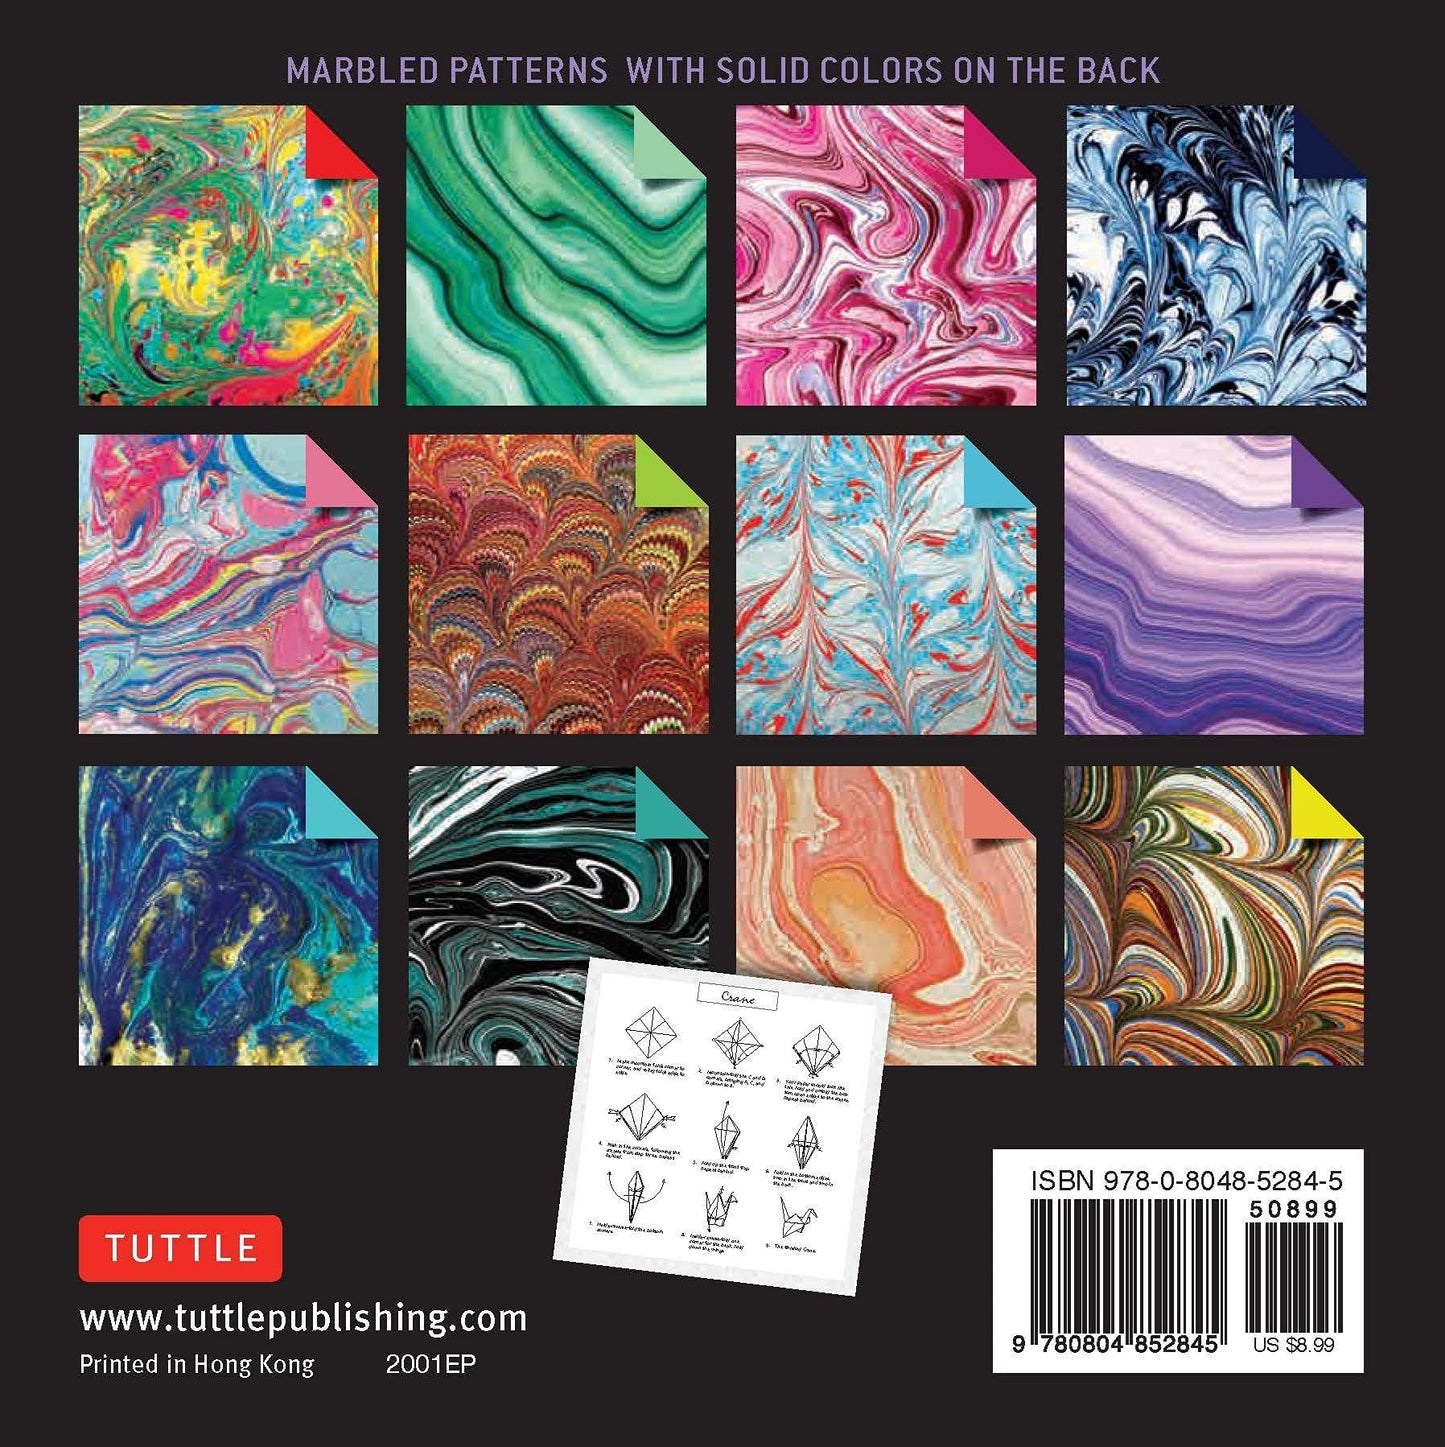 Book of 200 Sheets Marbled Patterns Origami Paper